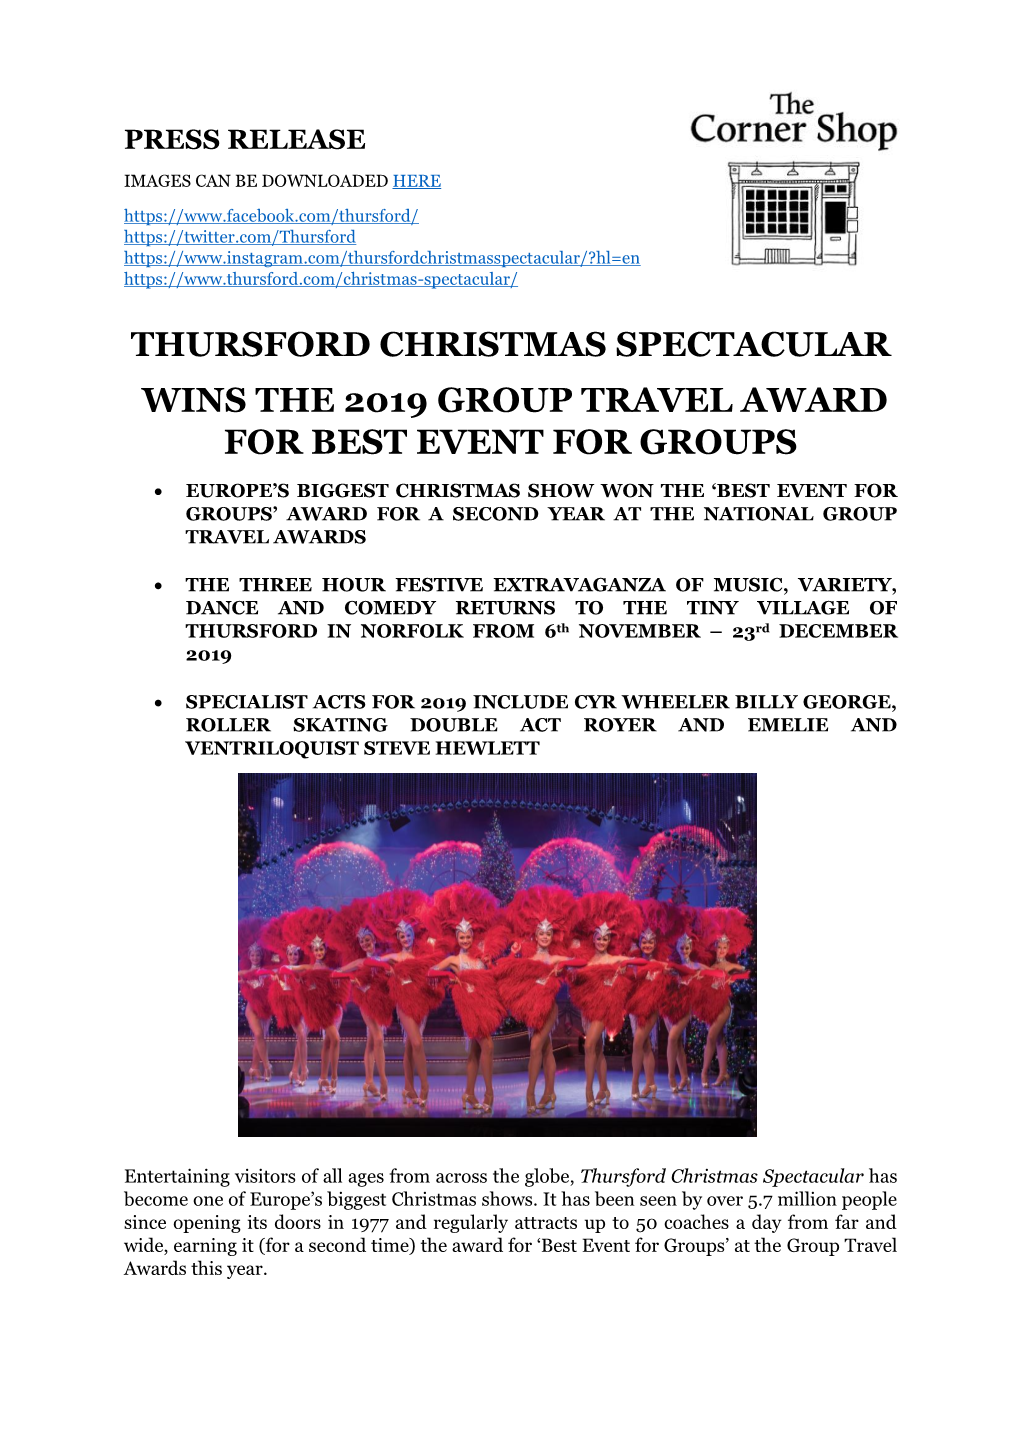 Thursford Christmas Spectacular Wins the 2019 Group Travel Award for Best Event for Groups